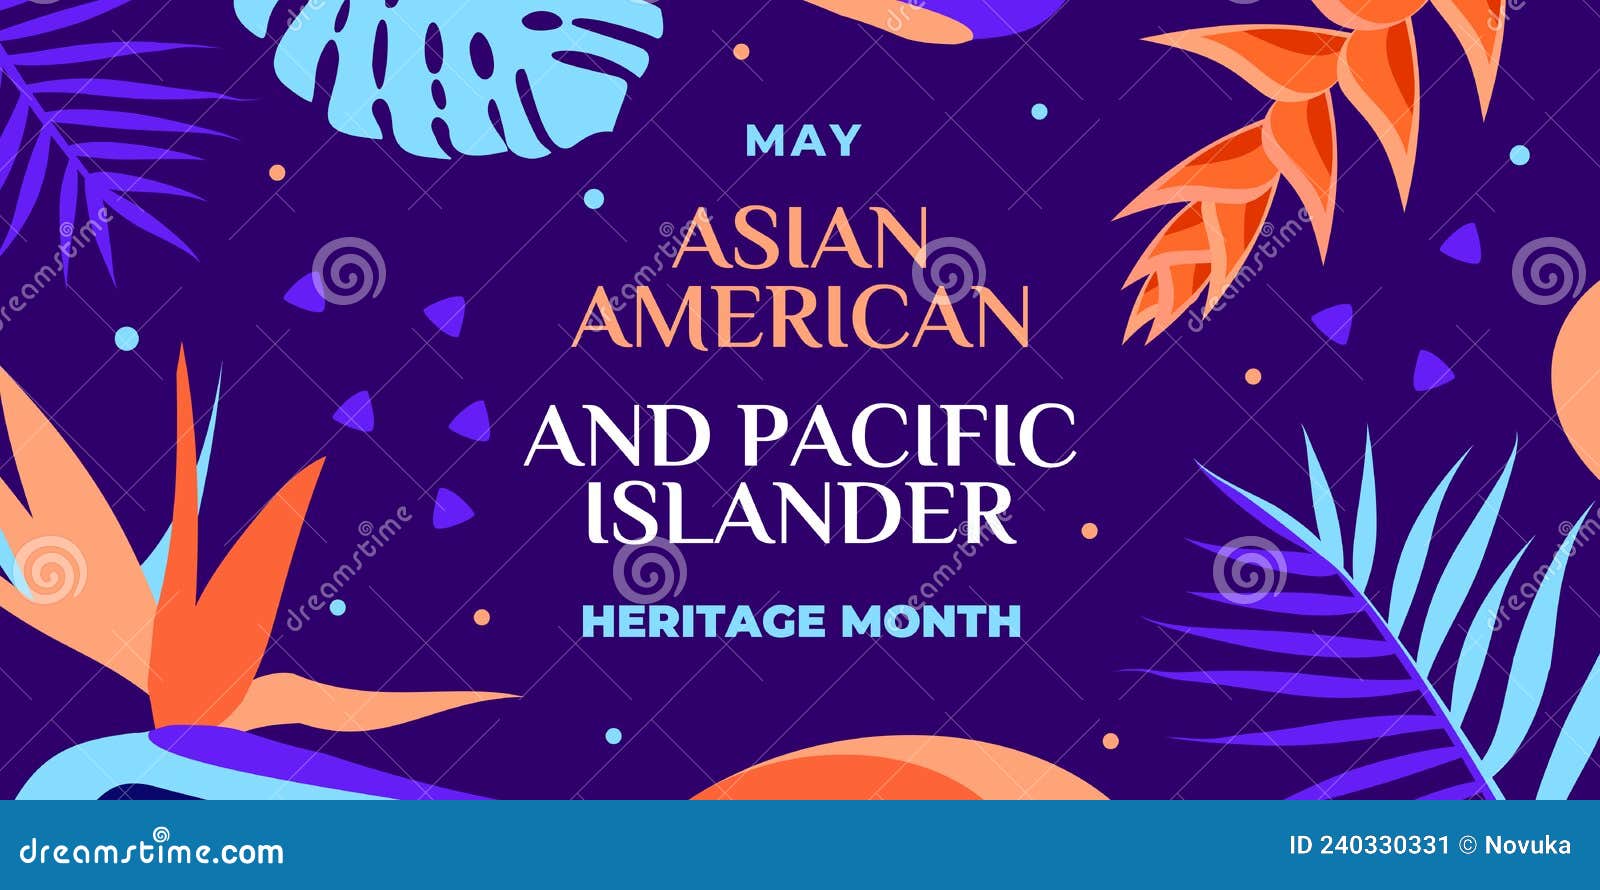 asian american and pacific islander heritage month.  banner for social media, card, poster.  with text, tropical